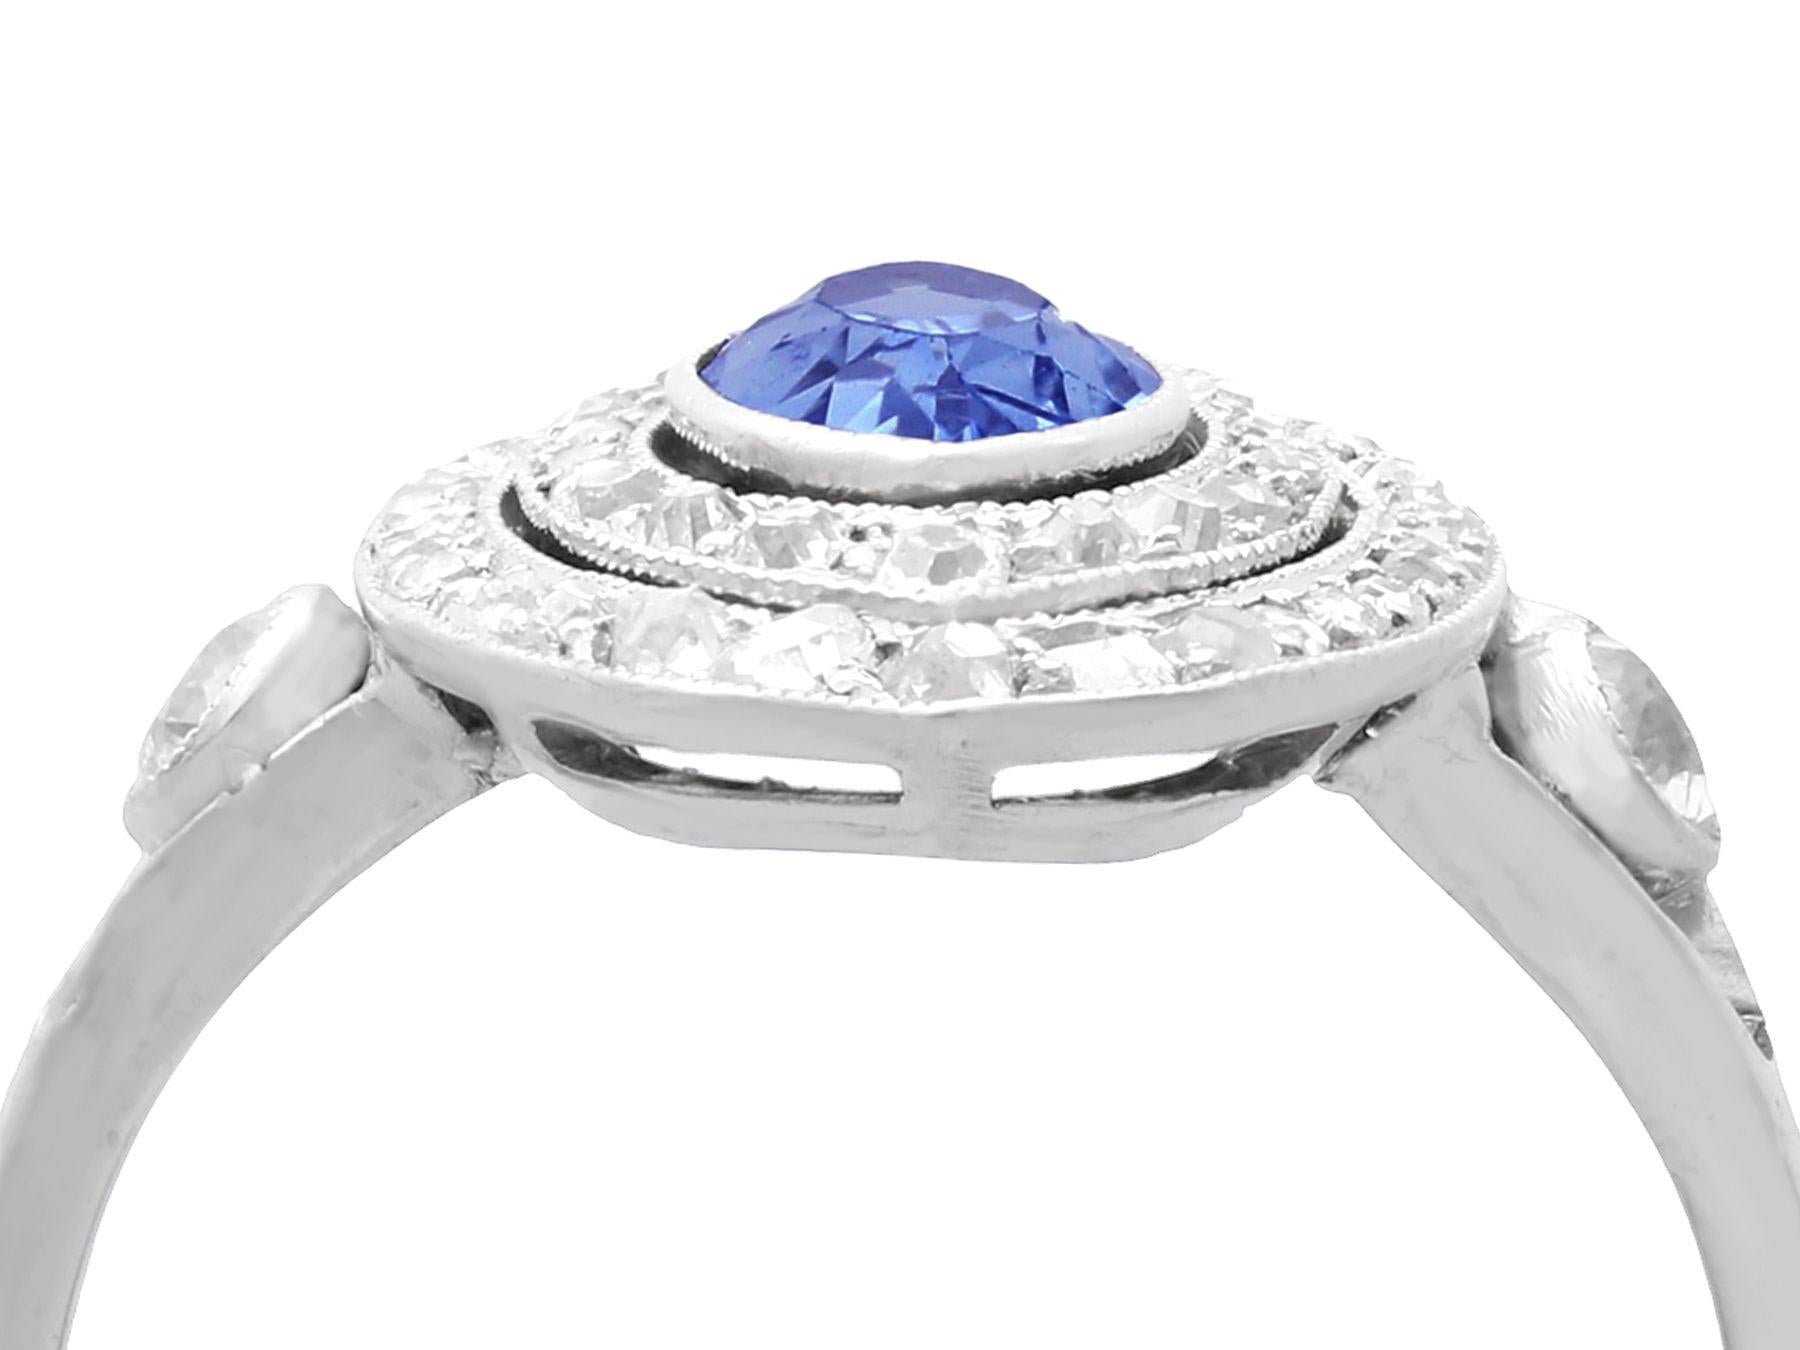 A stunning antique French 0.59 carat blue sapphire and 0.65 carat diamond, 18 karat white gold and platinum set marquise ring; part of our diverse antique jewelry collections.

This stunning, fine and impressive marquise sapphire and diamond ring